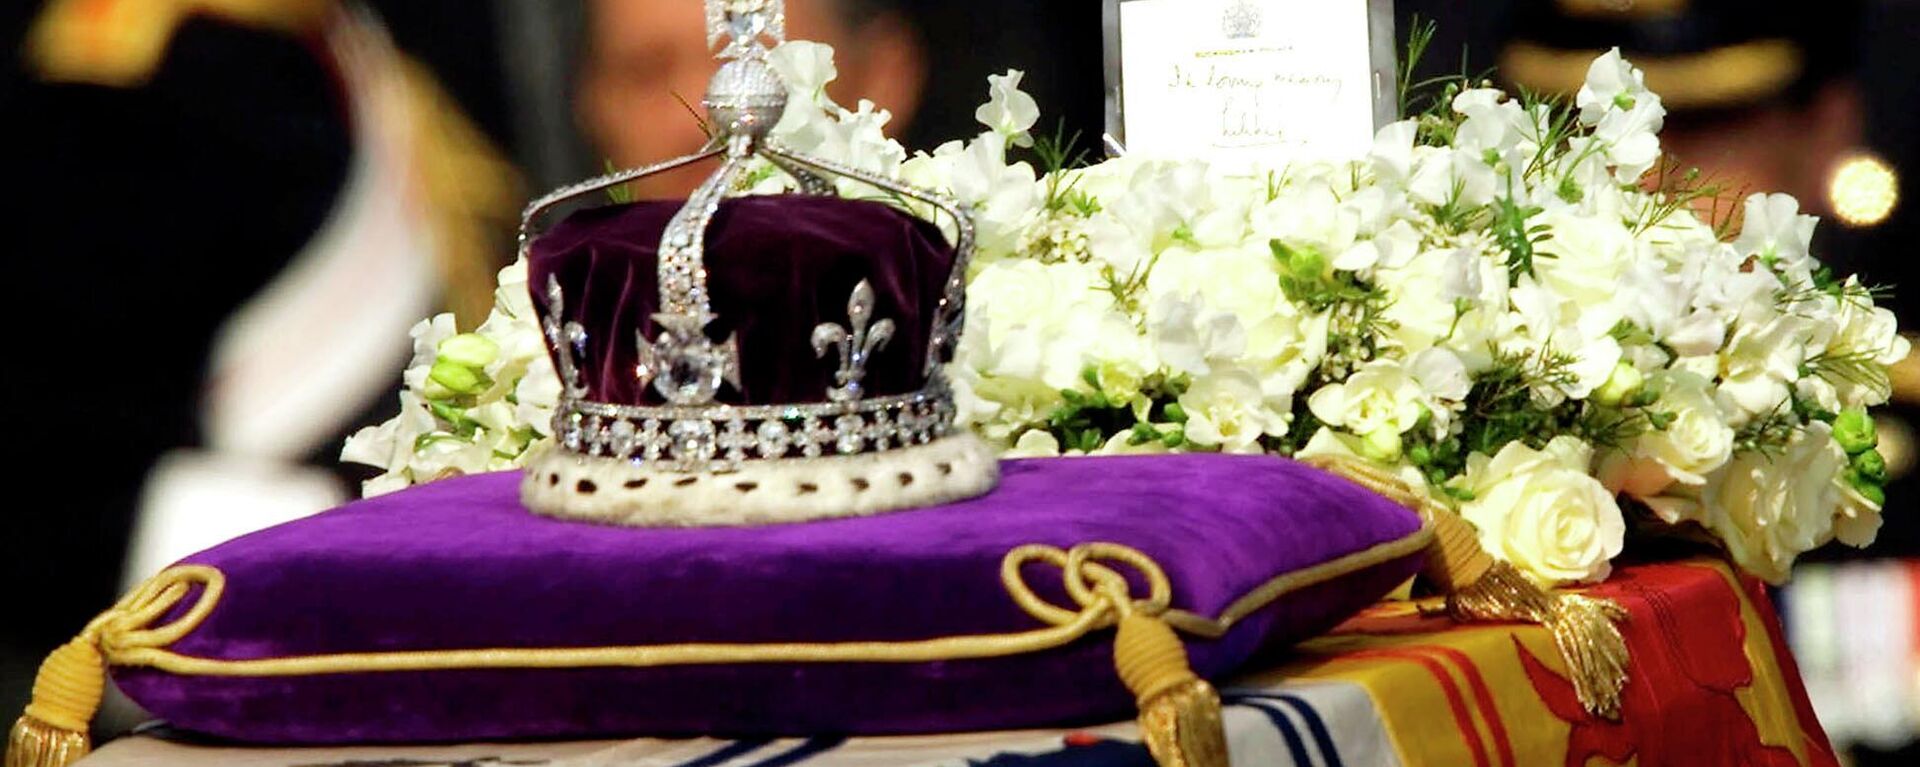 FILE - The Koh-i-noor, or mountain of light, diamond, set in the Maltese Cross at the front of the crown made for Britain's late Queen Mother Elizabeth, is seen on her coffin, along with her personal standard, a wreath and a note from her daughter, Queen Elizabeth II, as it is drawn to London's Westminster Hall in this April 5, 2002. Hundreds of thousands of people are expected to flock to London’s medieval Westminster Hall from Wednesday, Sept. 14, 2022, to pay their respects to Queen Elizabeth II, whose coffin will lie in state for four days until her funeral on Monday. (AP Photo/Alastair Grant, File) - Sputnik International, 1920, 13.10.2022